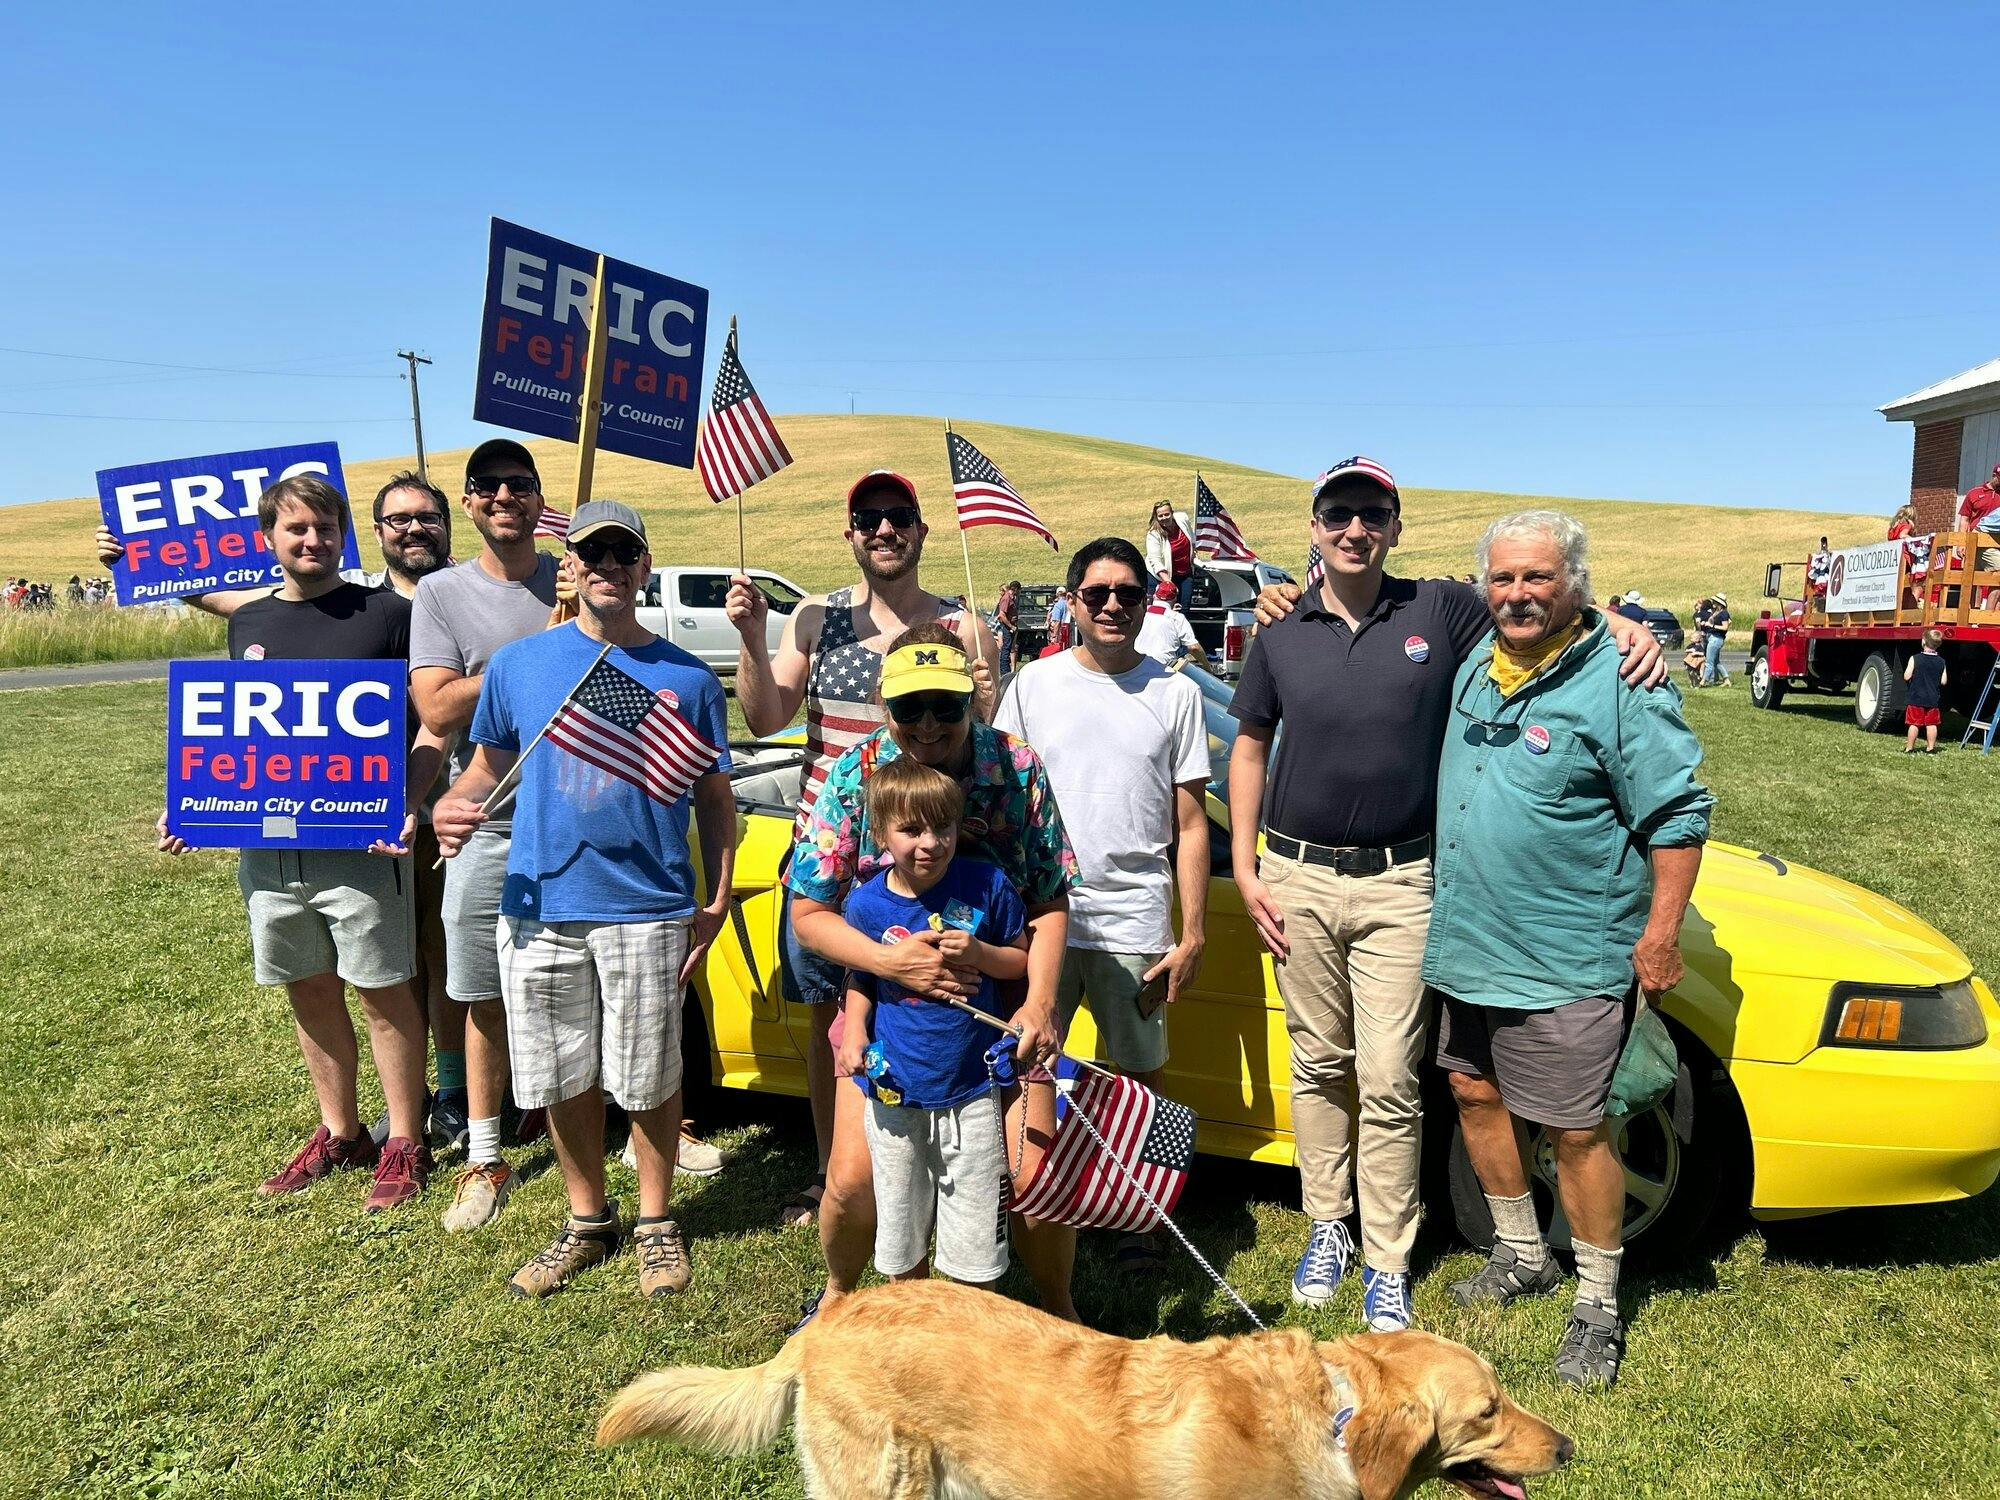 Eric Fejeran at the Johnson Parade with his supporters.